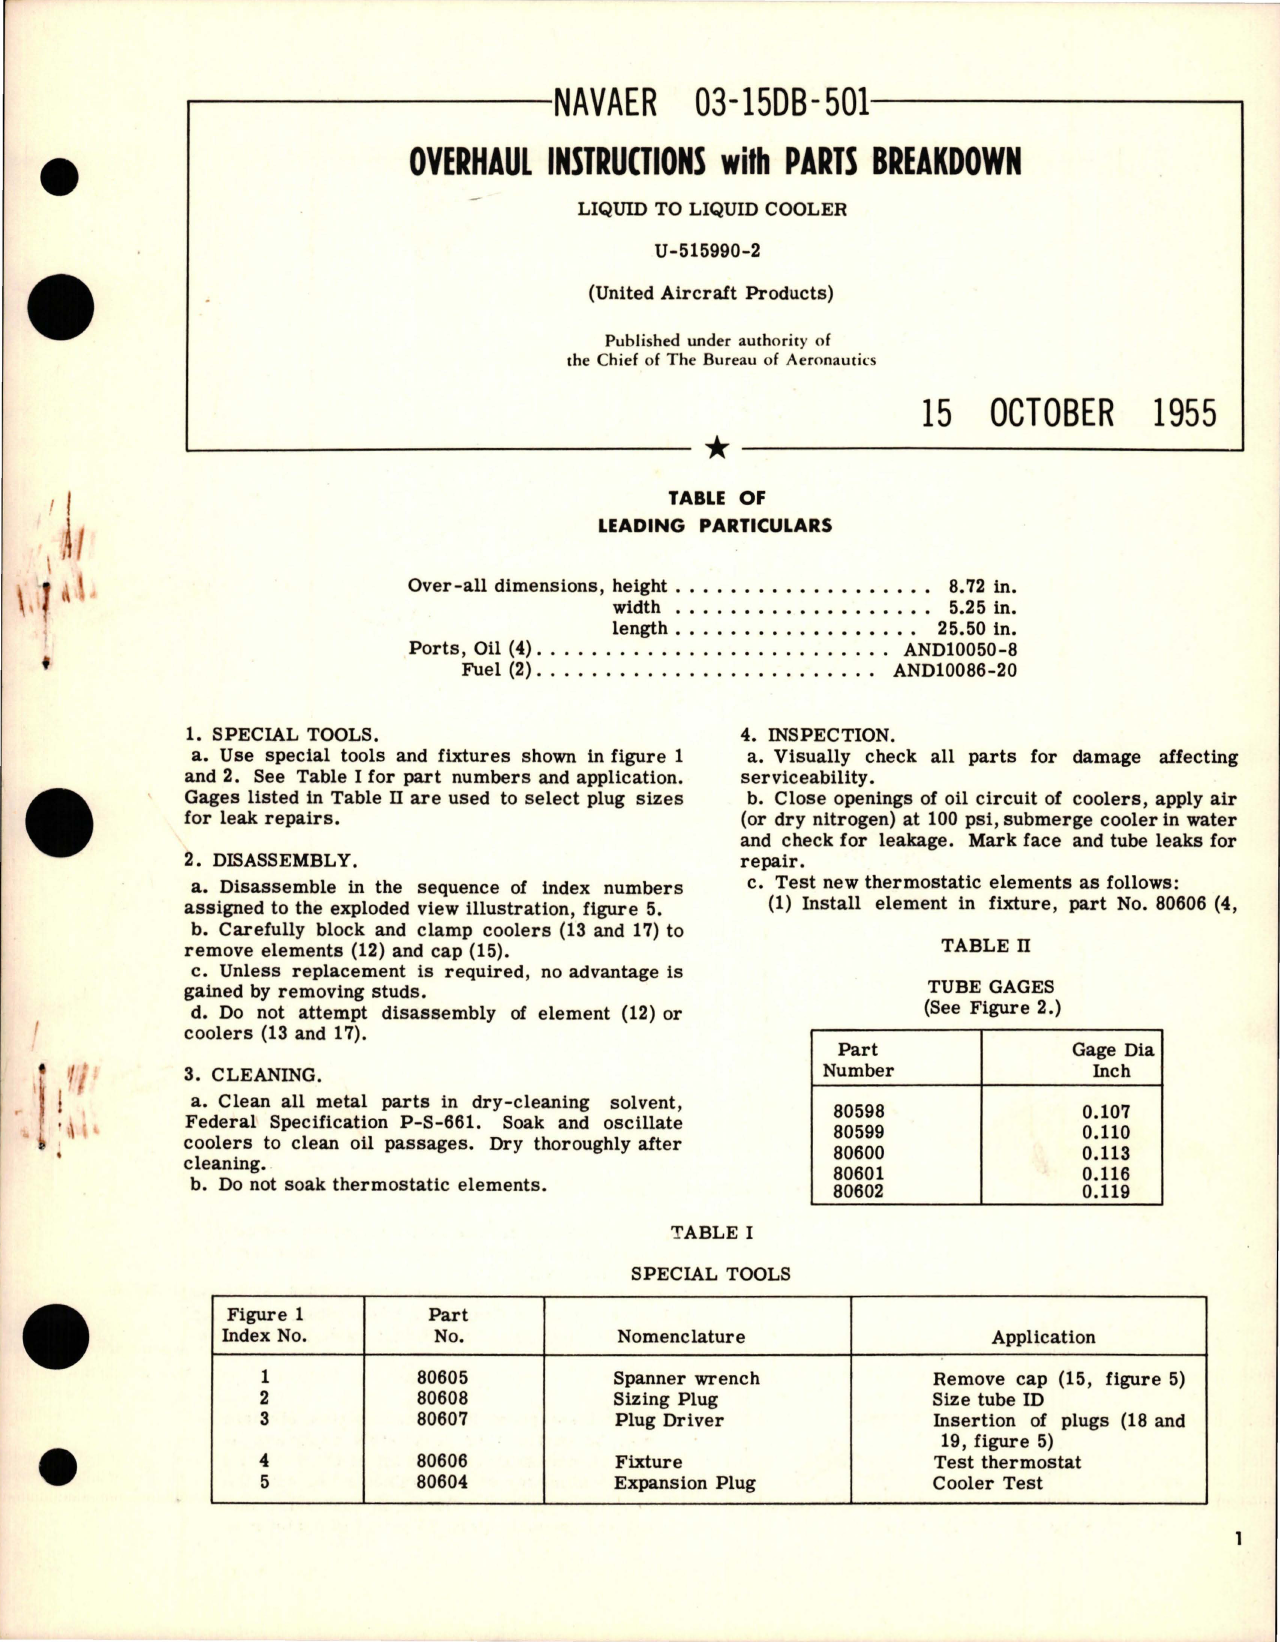 Sample page 1 from AirCorps Library document: Overhaul Instructions with Parts Breakdown for Liquid to Liquid Cooler - U-515990-2